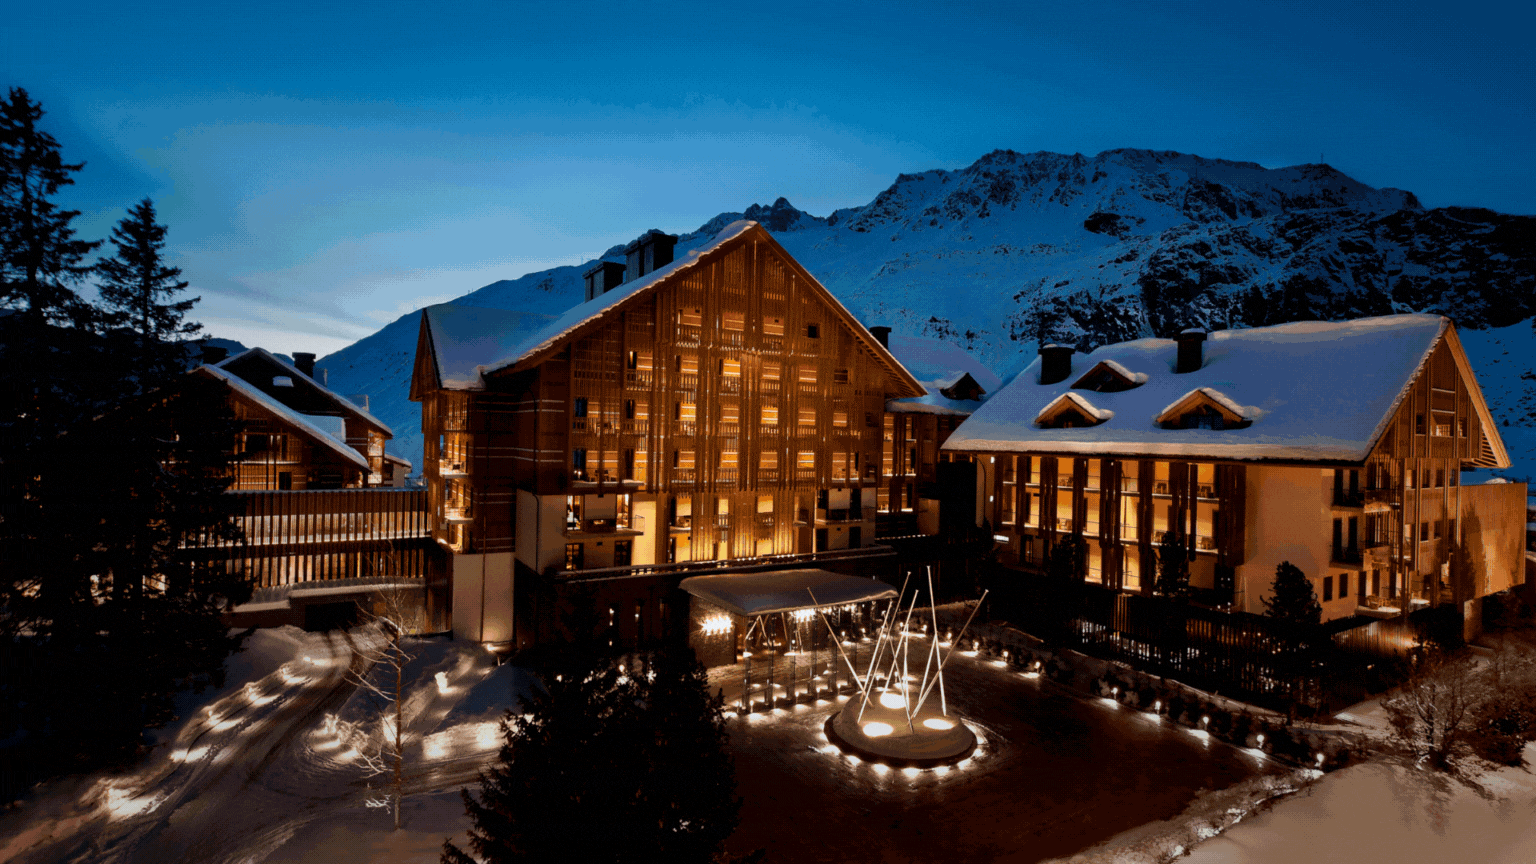 POWDER PARADISE: MY TOP SKI-IN, SKI-OUT HOTELS